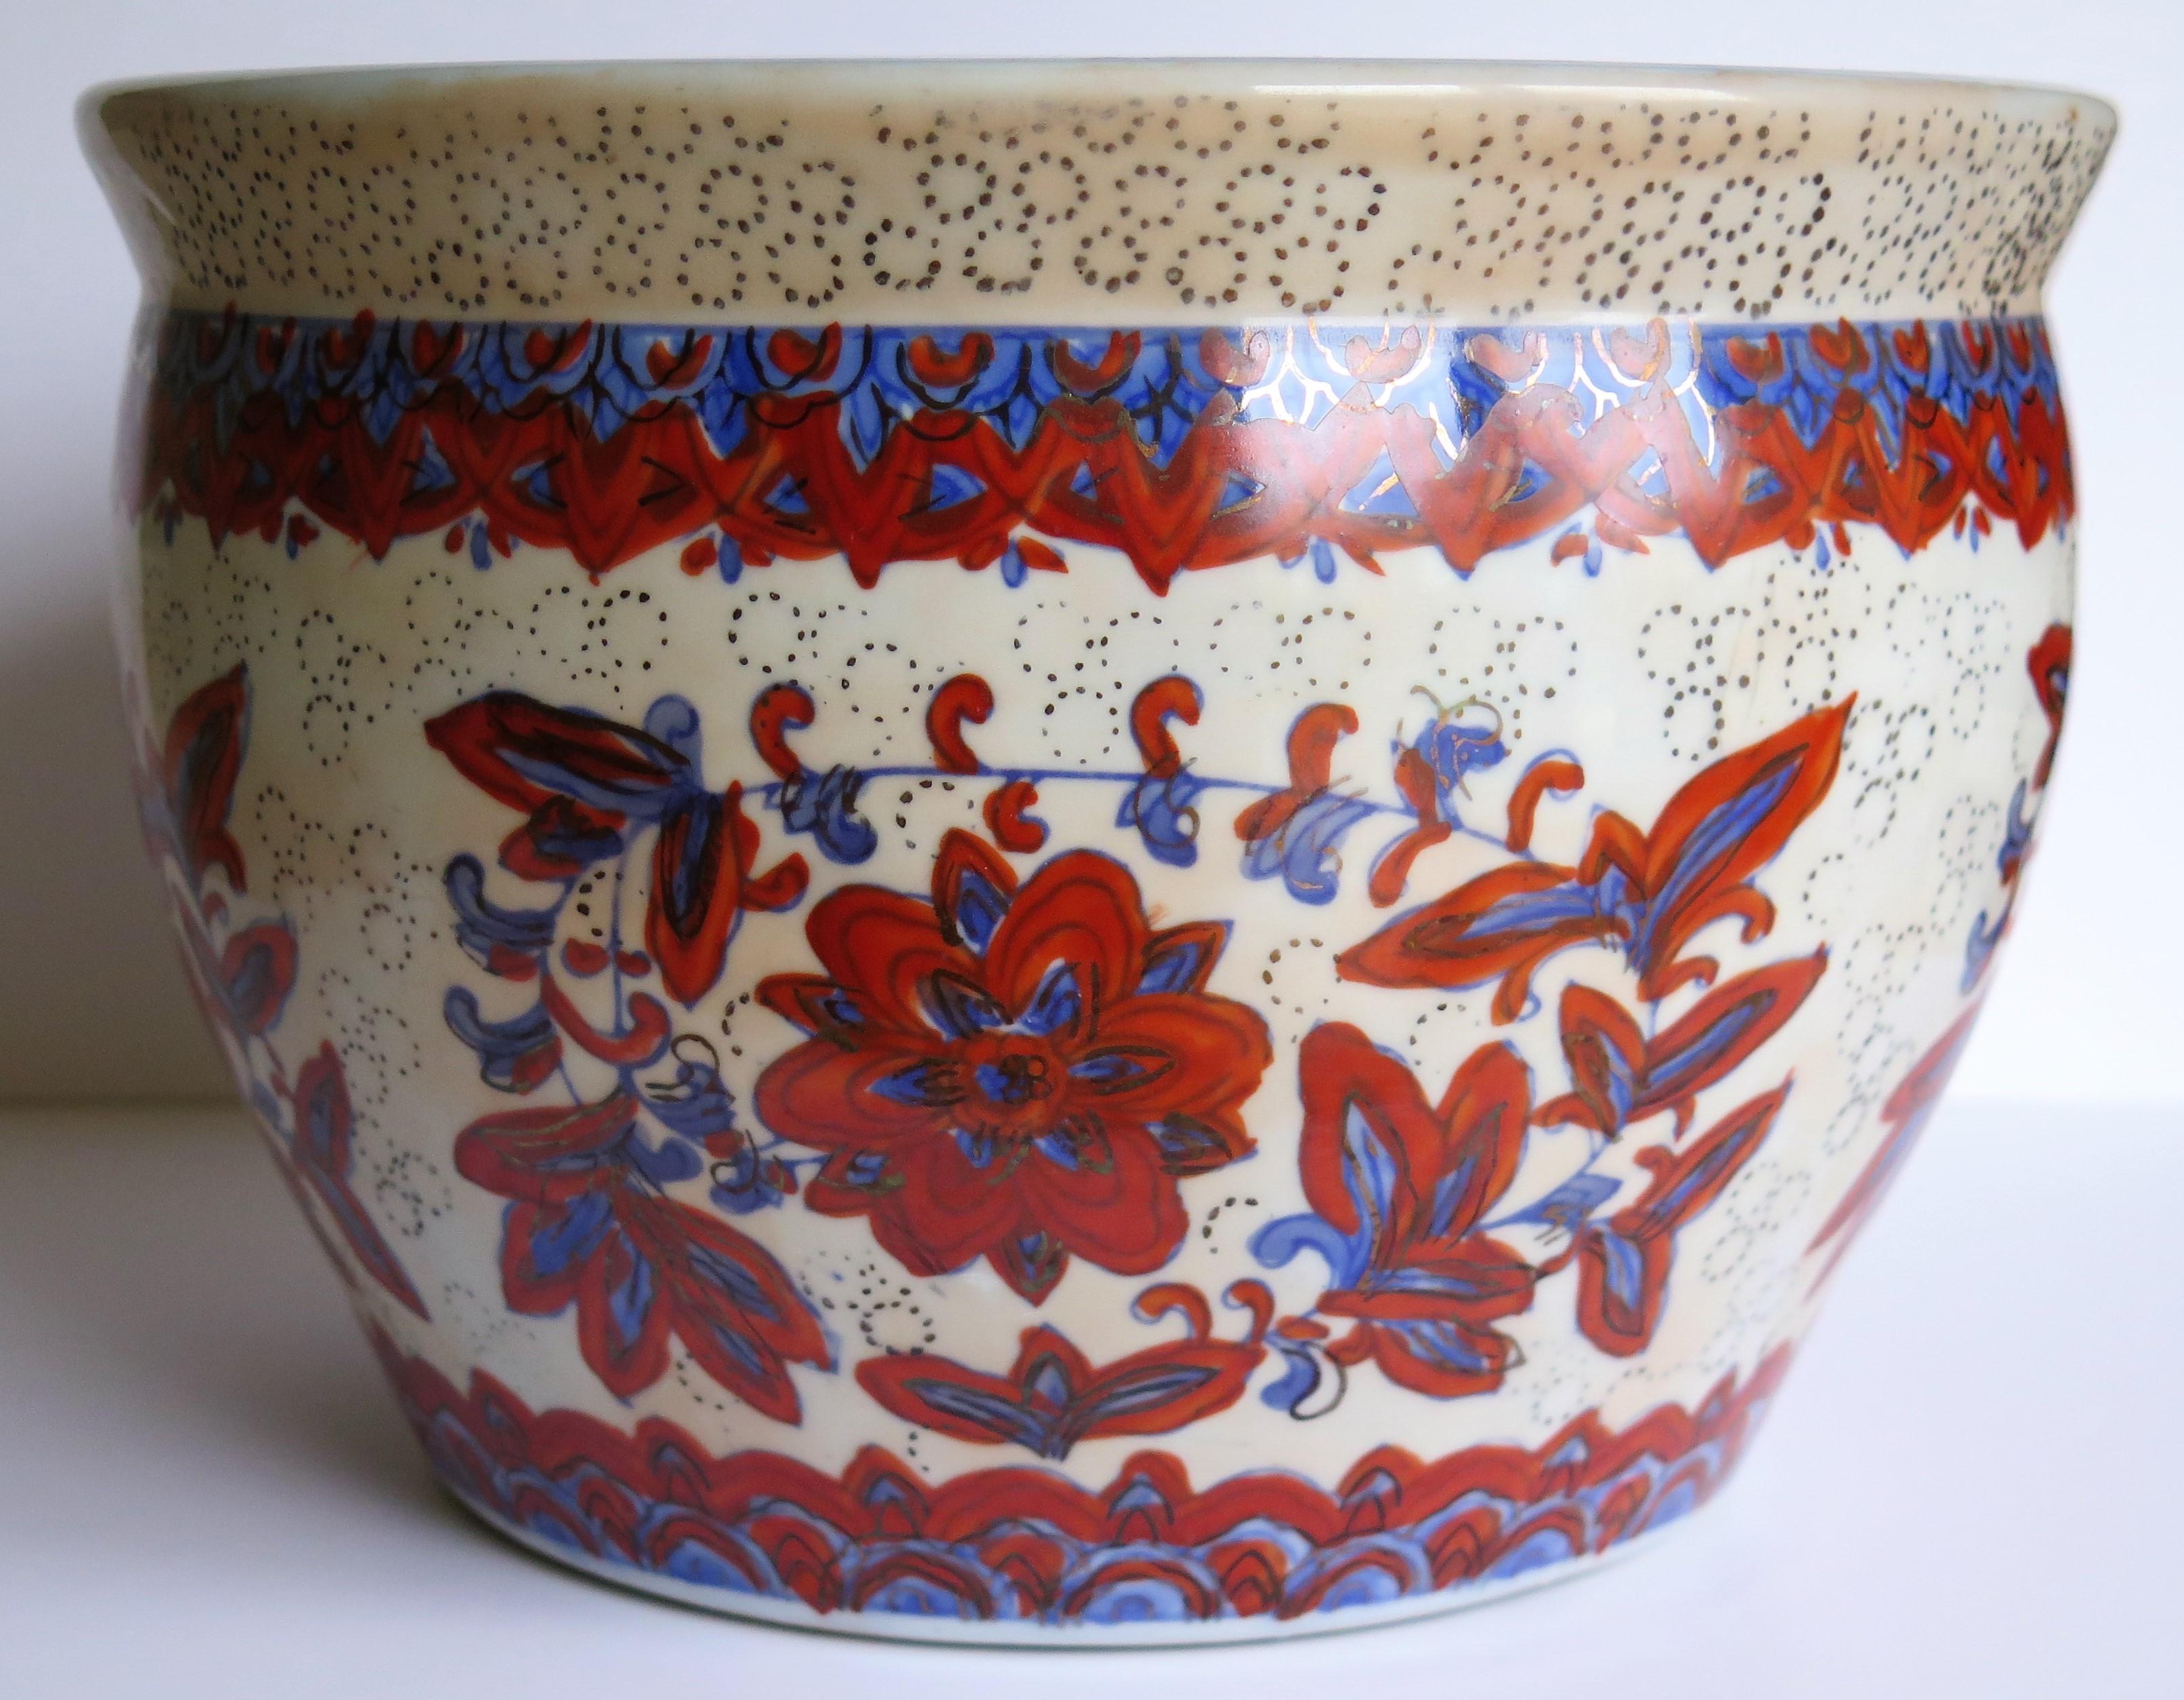 This is a good Chinese export porcelain jardinière or planter from the mid-20th century, circa 1940.

The jardinière is well potted and heavy, weighing nearly 3kg unpacked. 

It is hand decorated on the outside with a distinctive four section